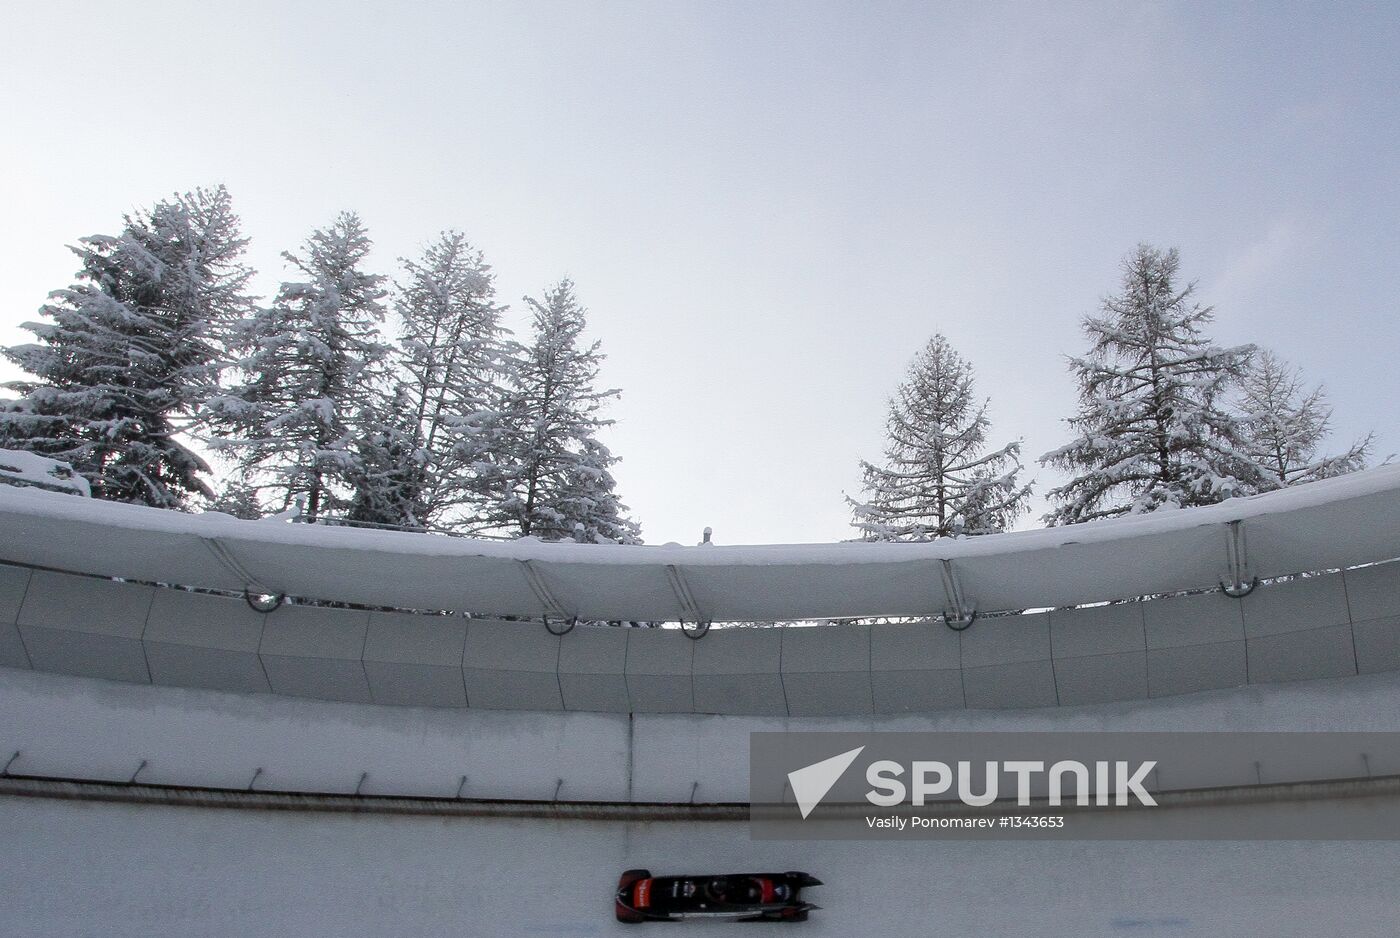 FIBT Bobsleigh and Skeleton European Championships. Day one